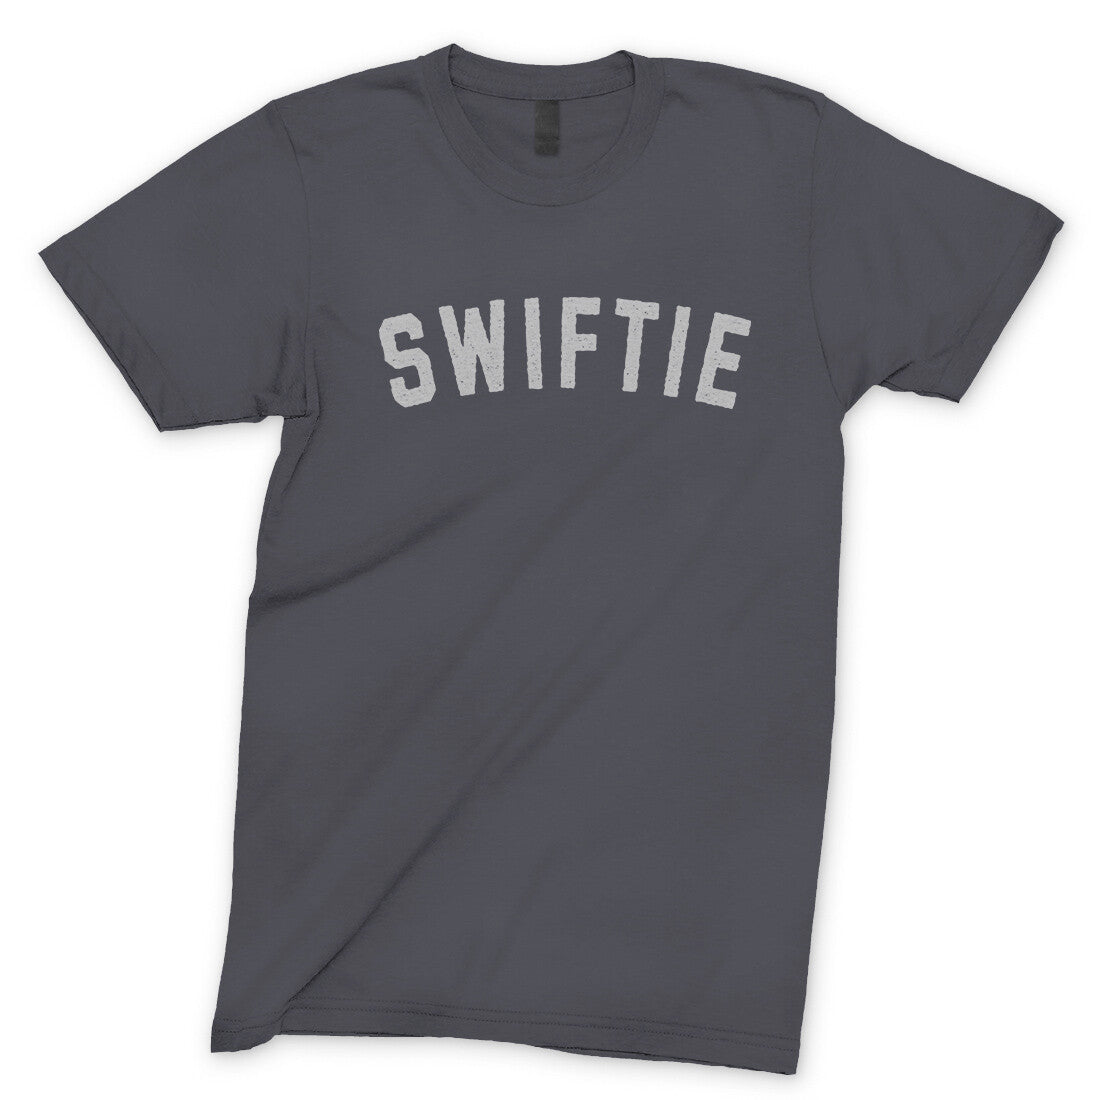 Swiftie in Charcoal Color